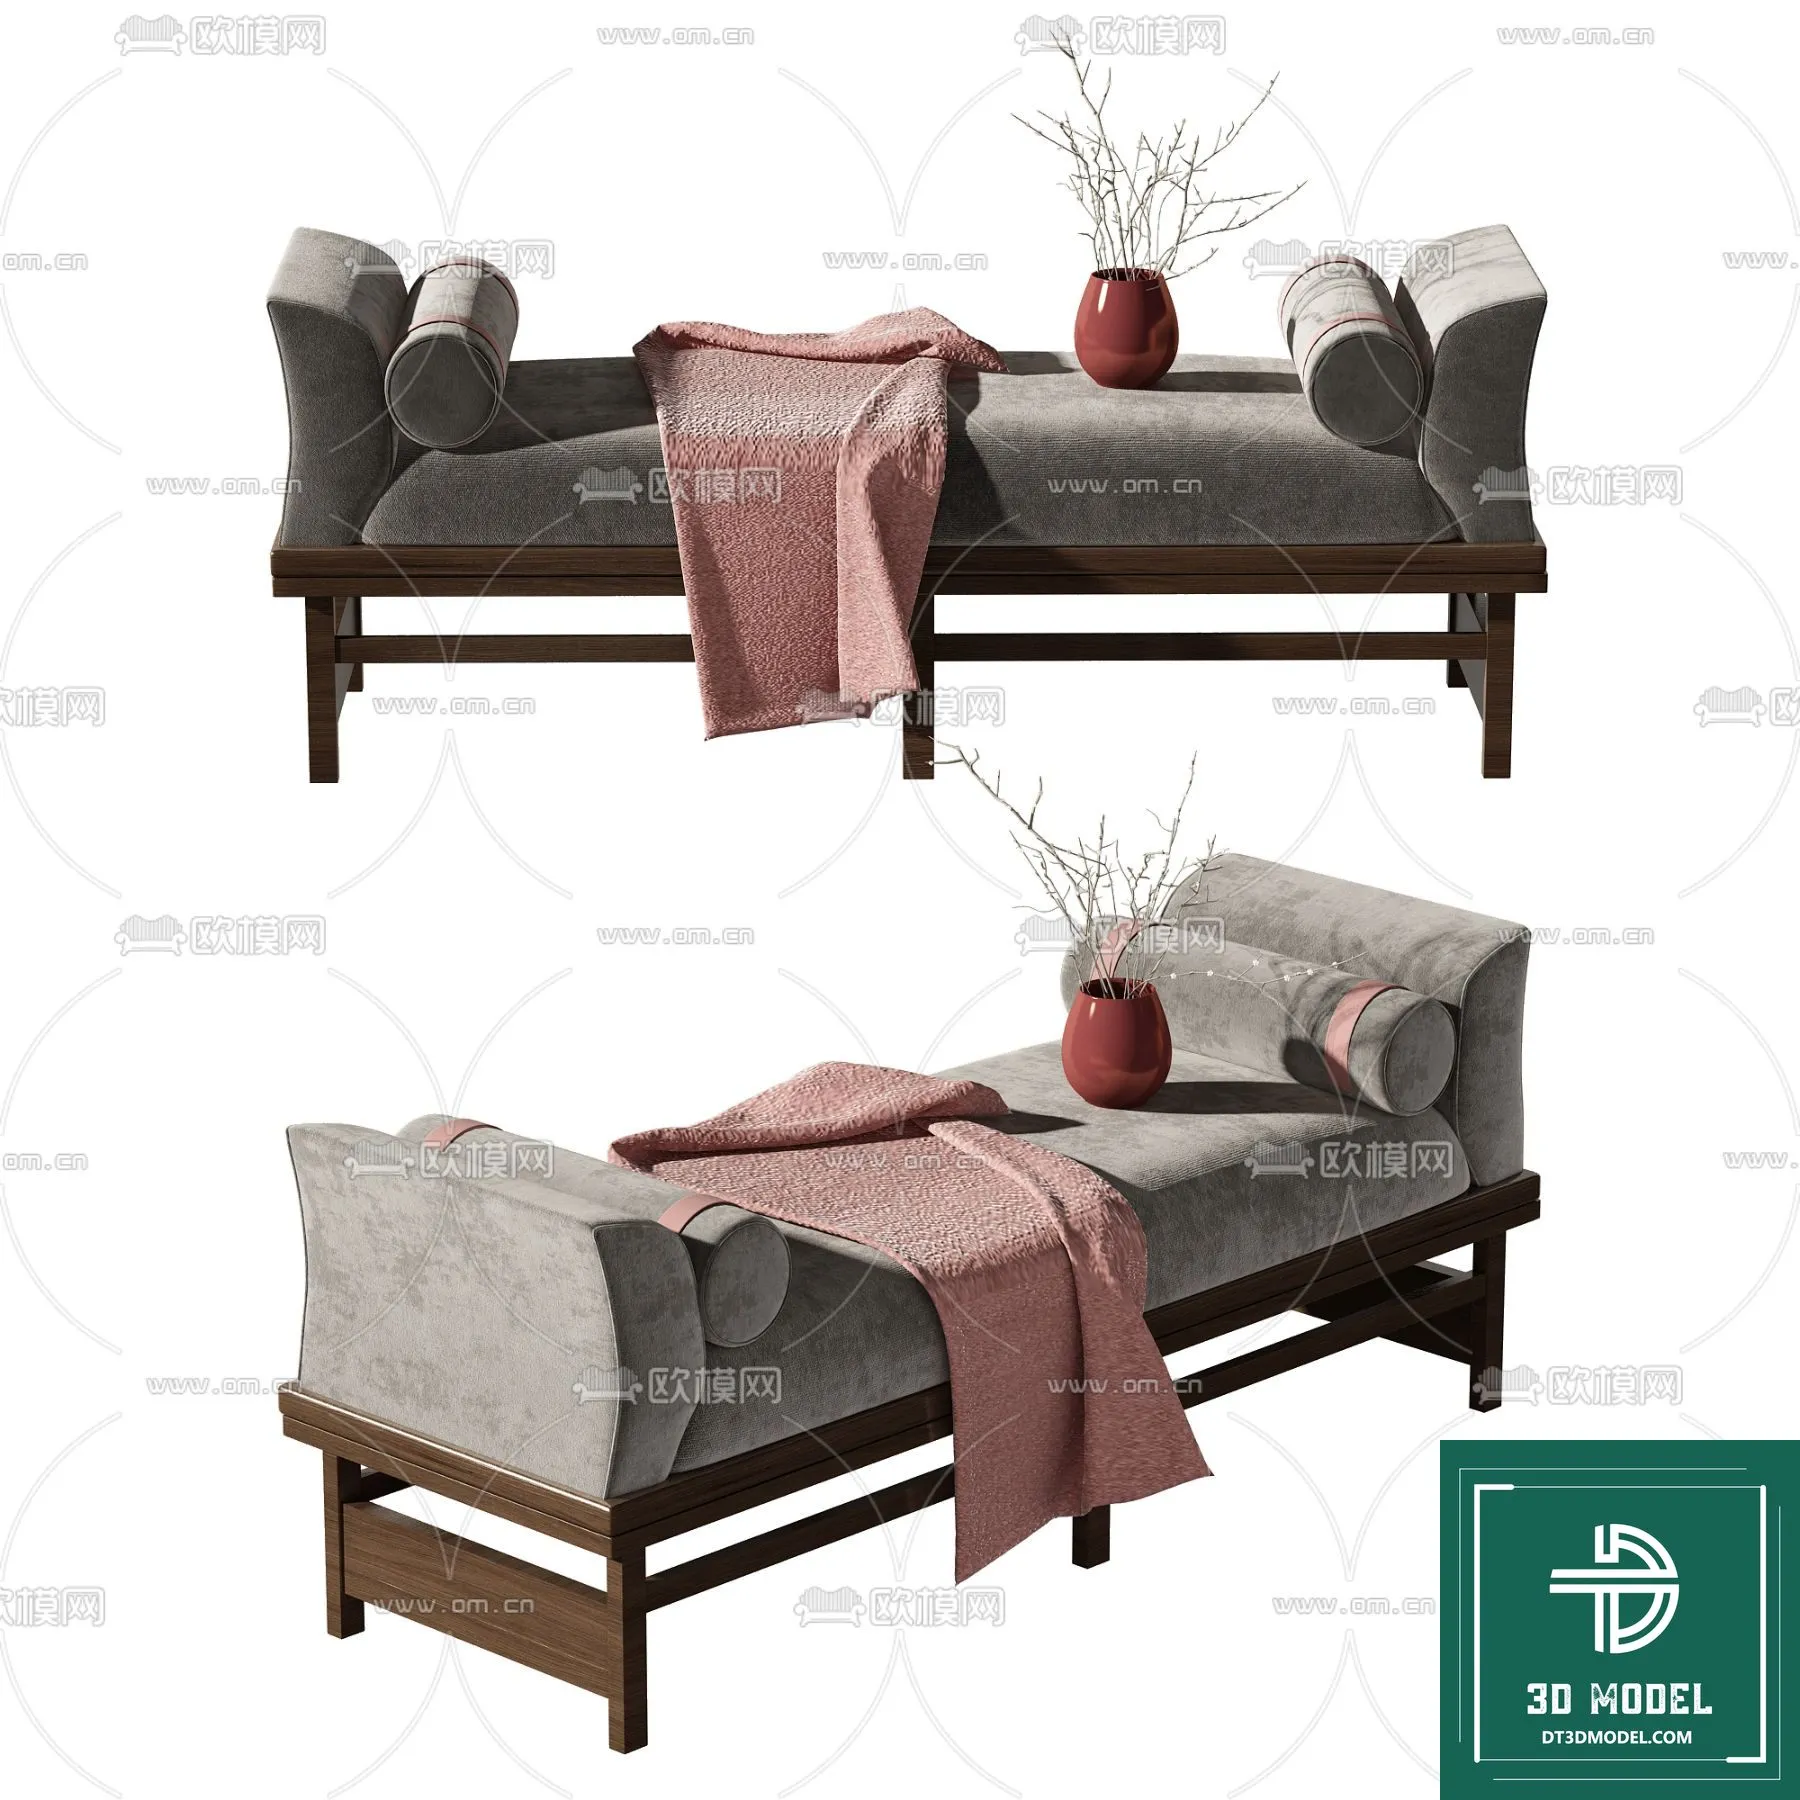 INDOCHINE STYLE – 3D MODELS – 495